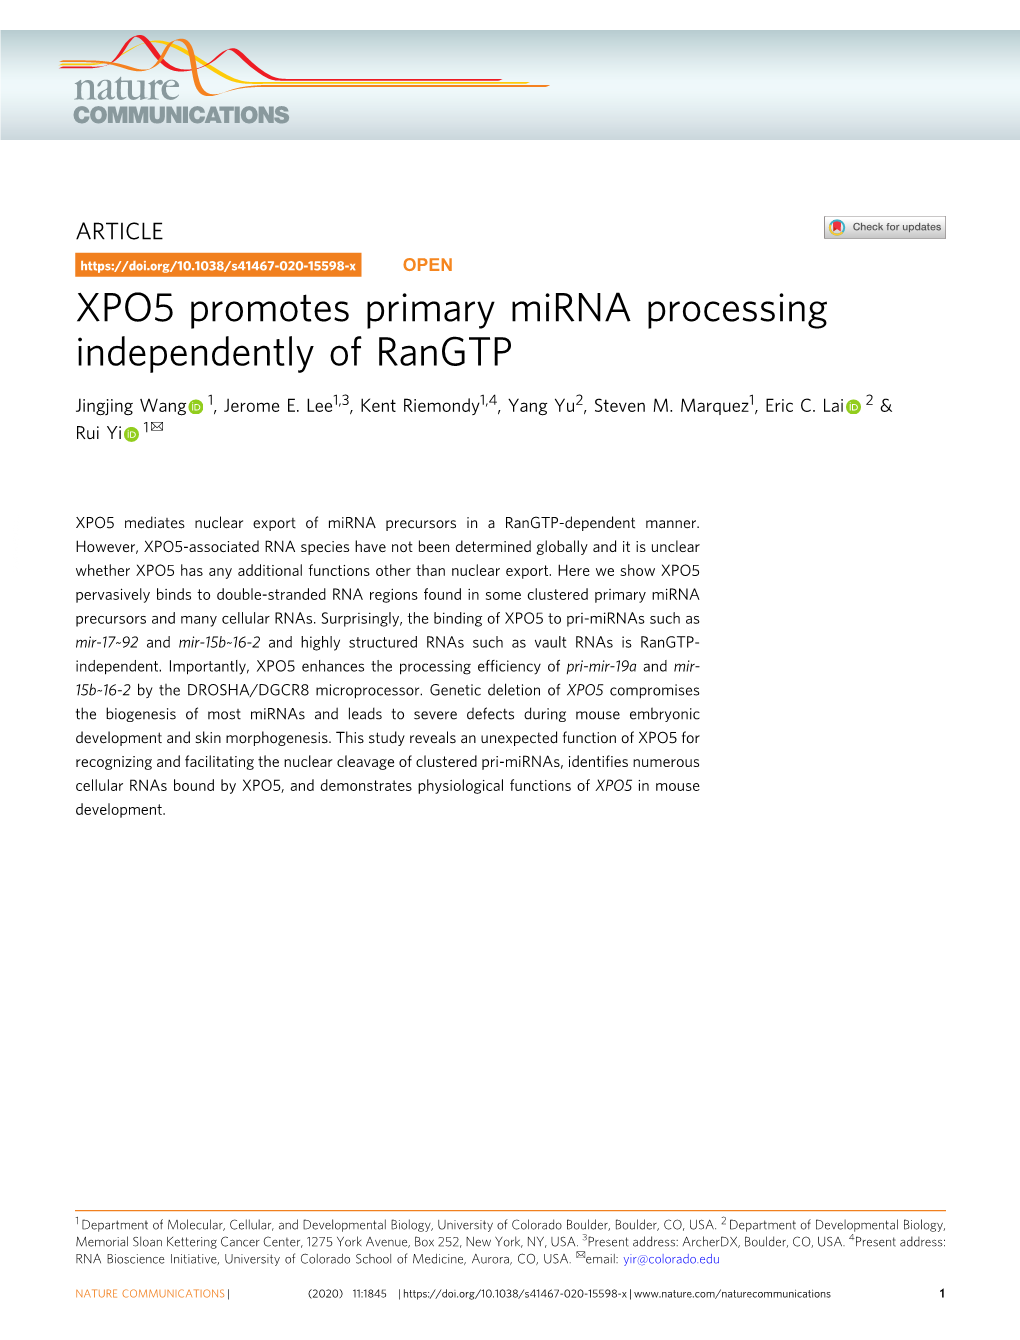 XPO5 Promotes Primary Mirna Processing Independently of Rangtp